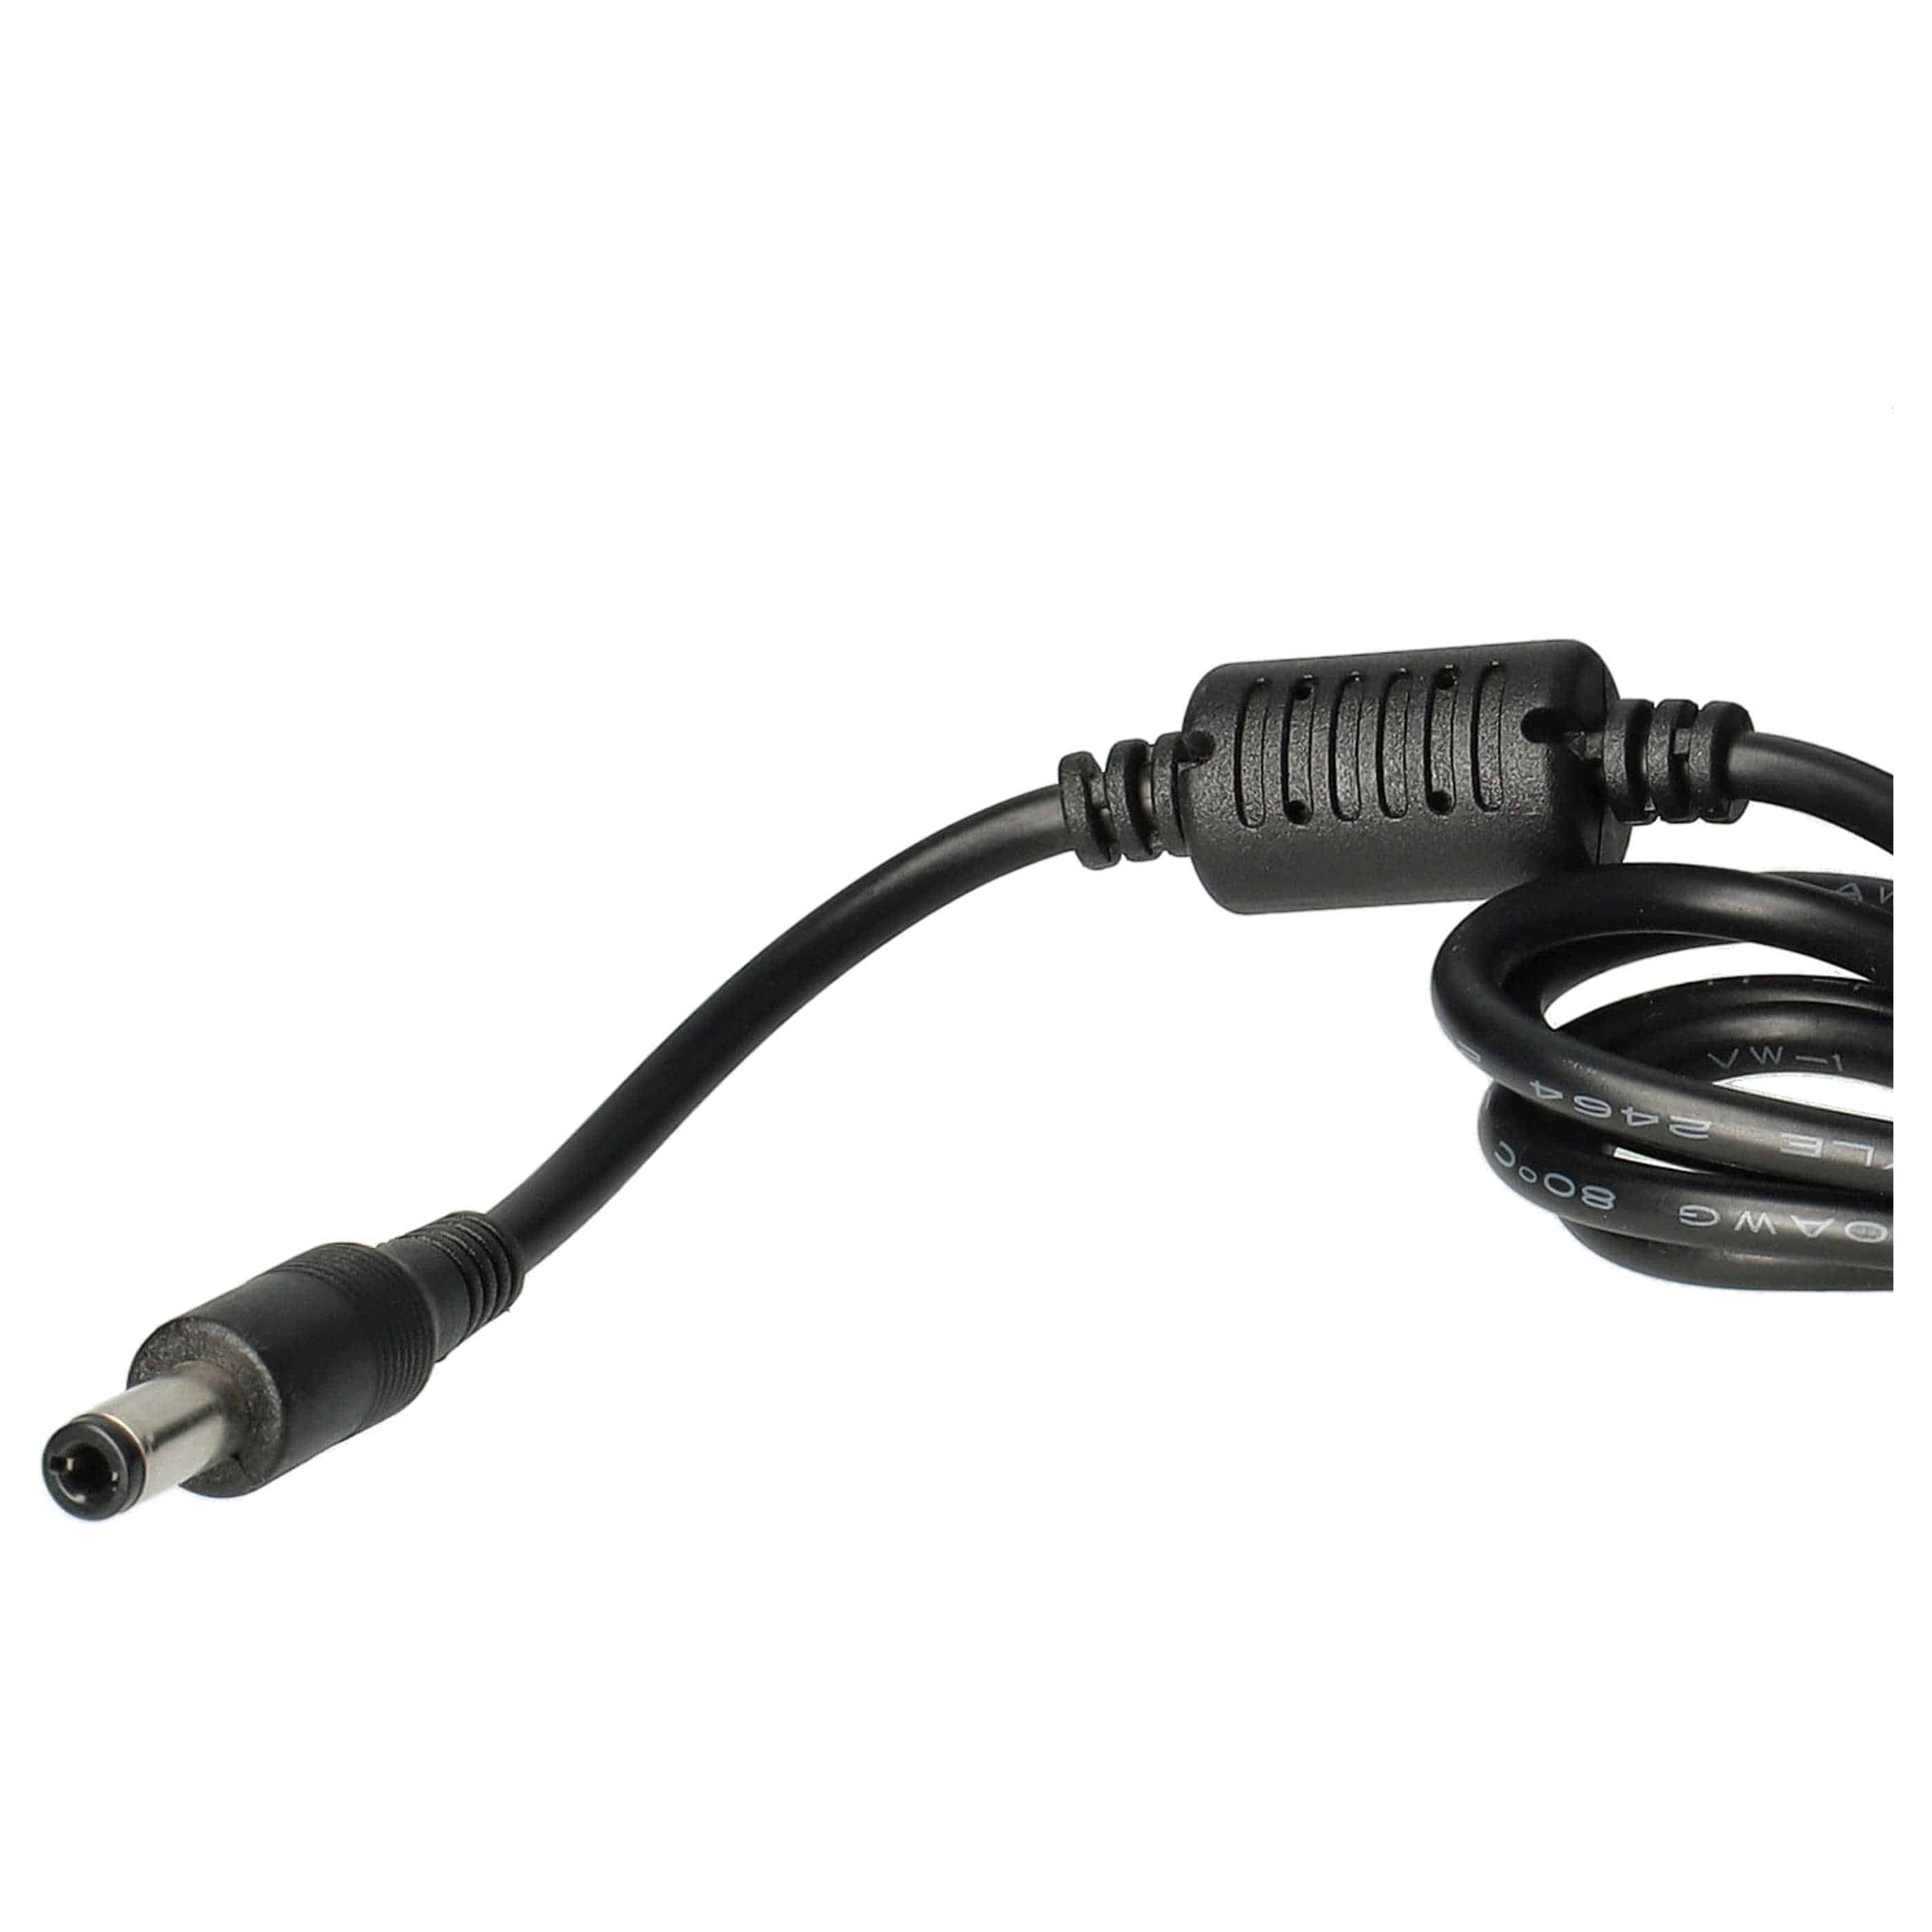 Vehicle Charger replaces 91.48R28.003, 91.46W28.002, 91.42S28.002, 91.41Q28.002 for Notebook - 4.74 A